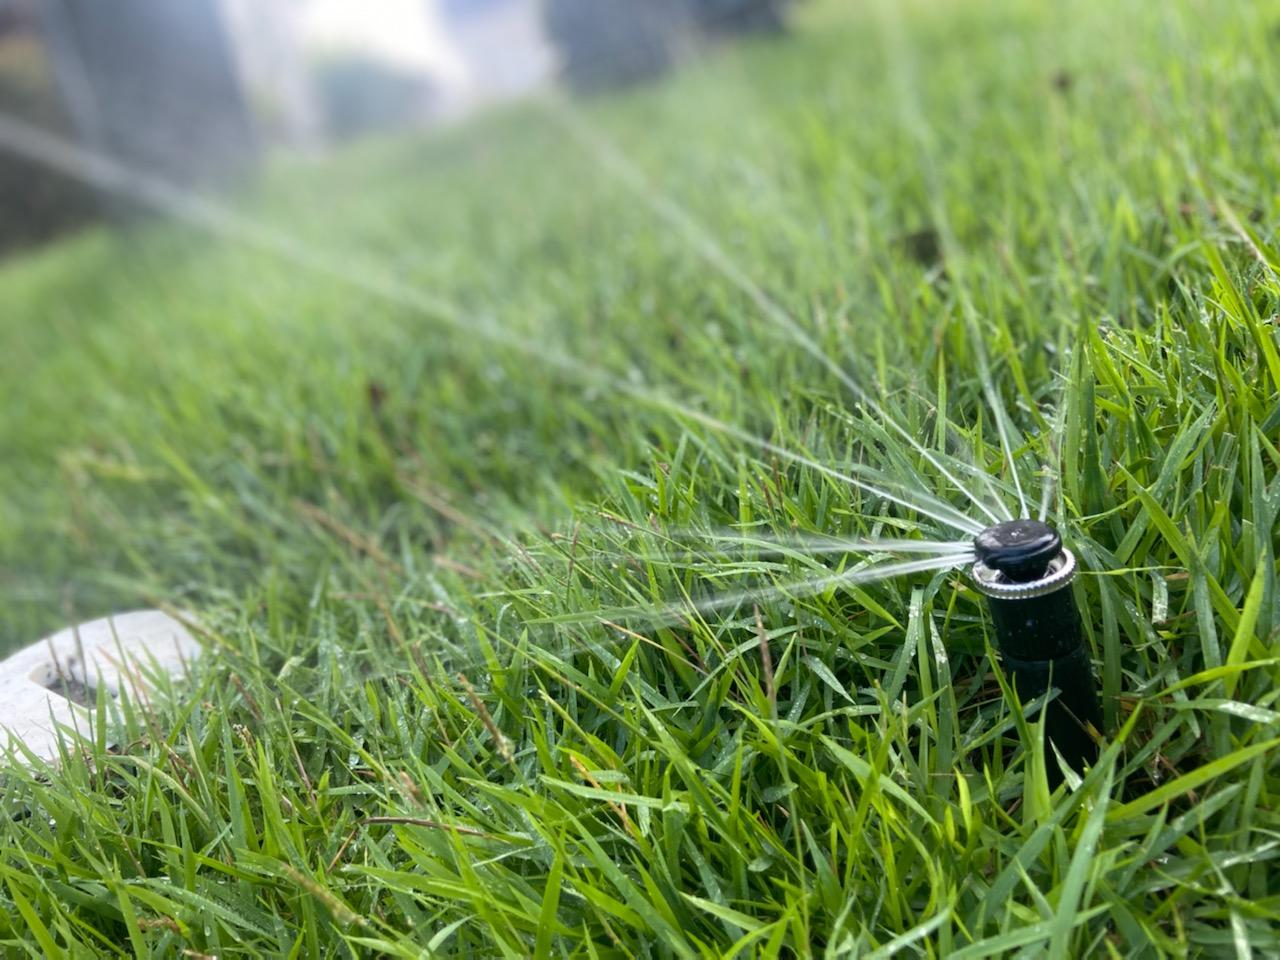 HOME IRRIGATION SYSTEM INSTALLATION
SERVING MOUNT PLEASANT, SC & SURROUNDING AREAS